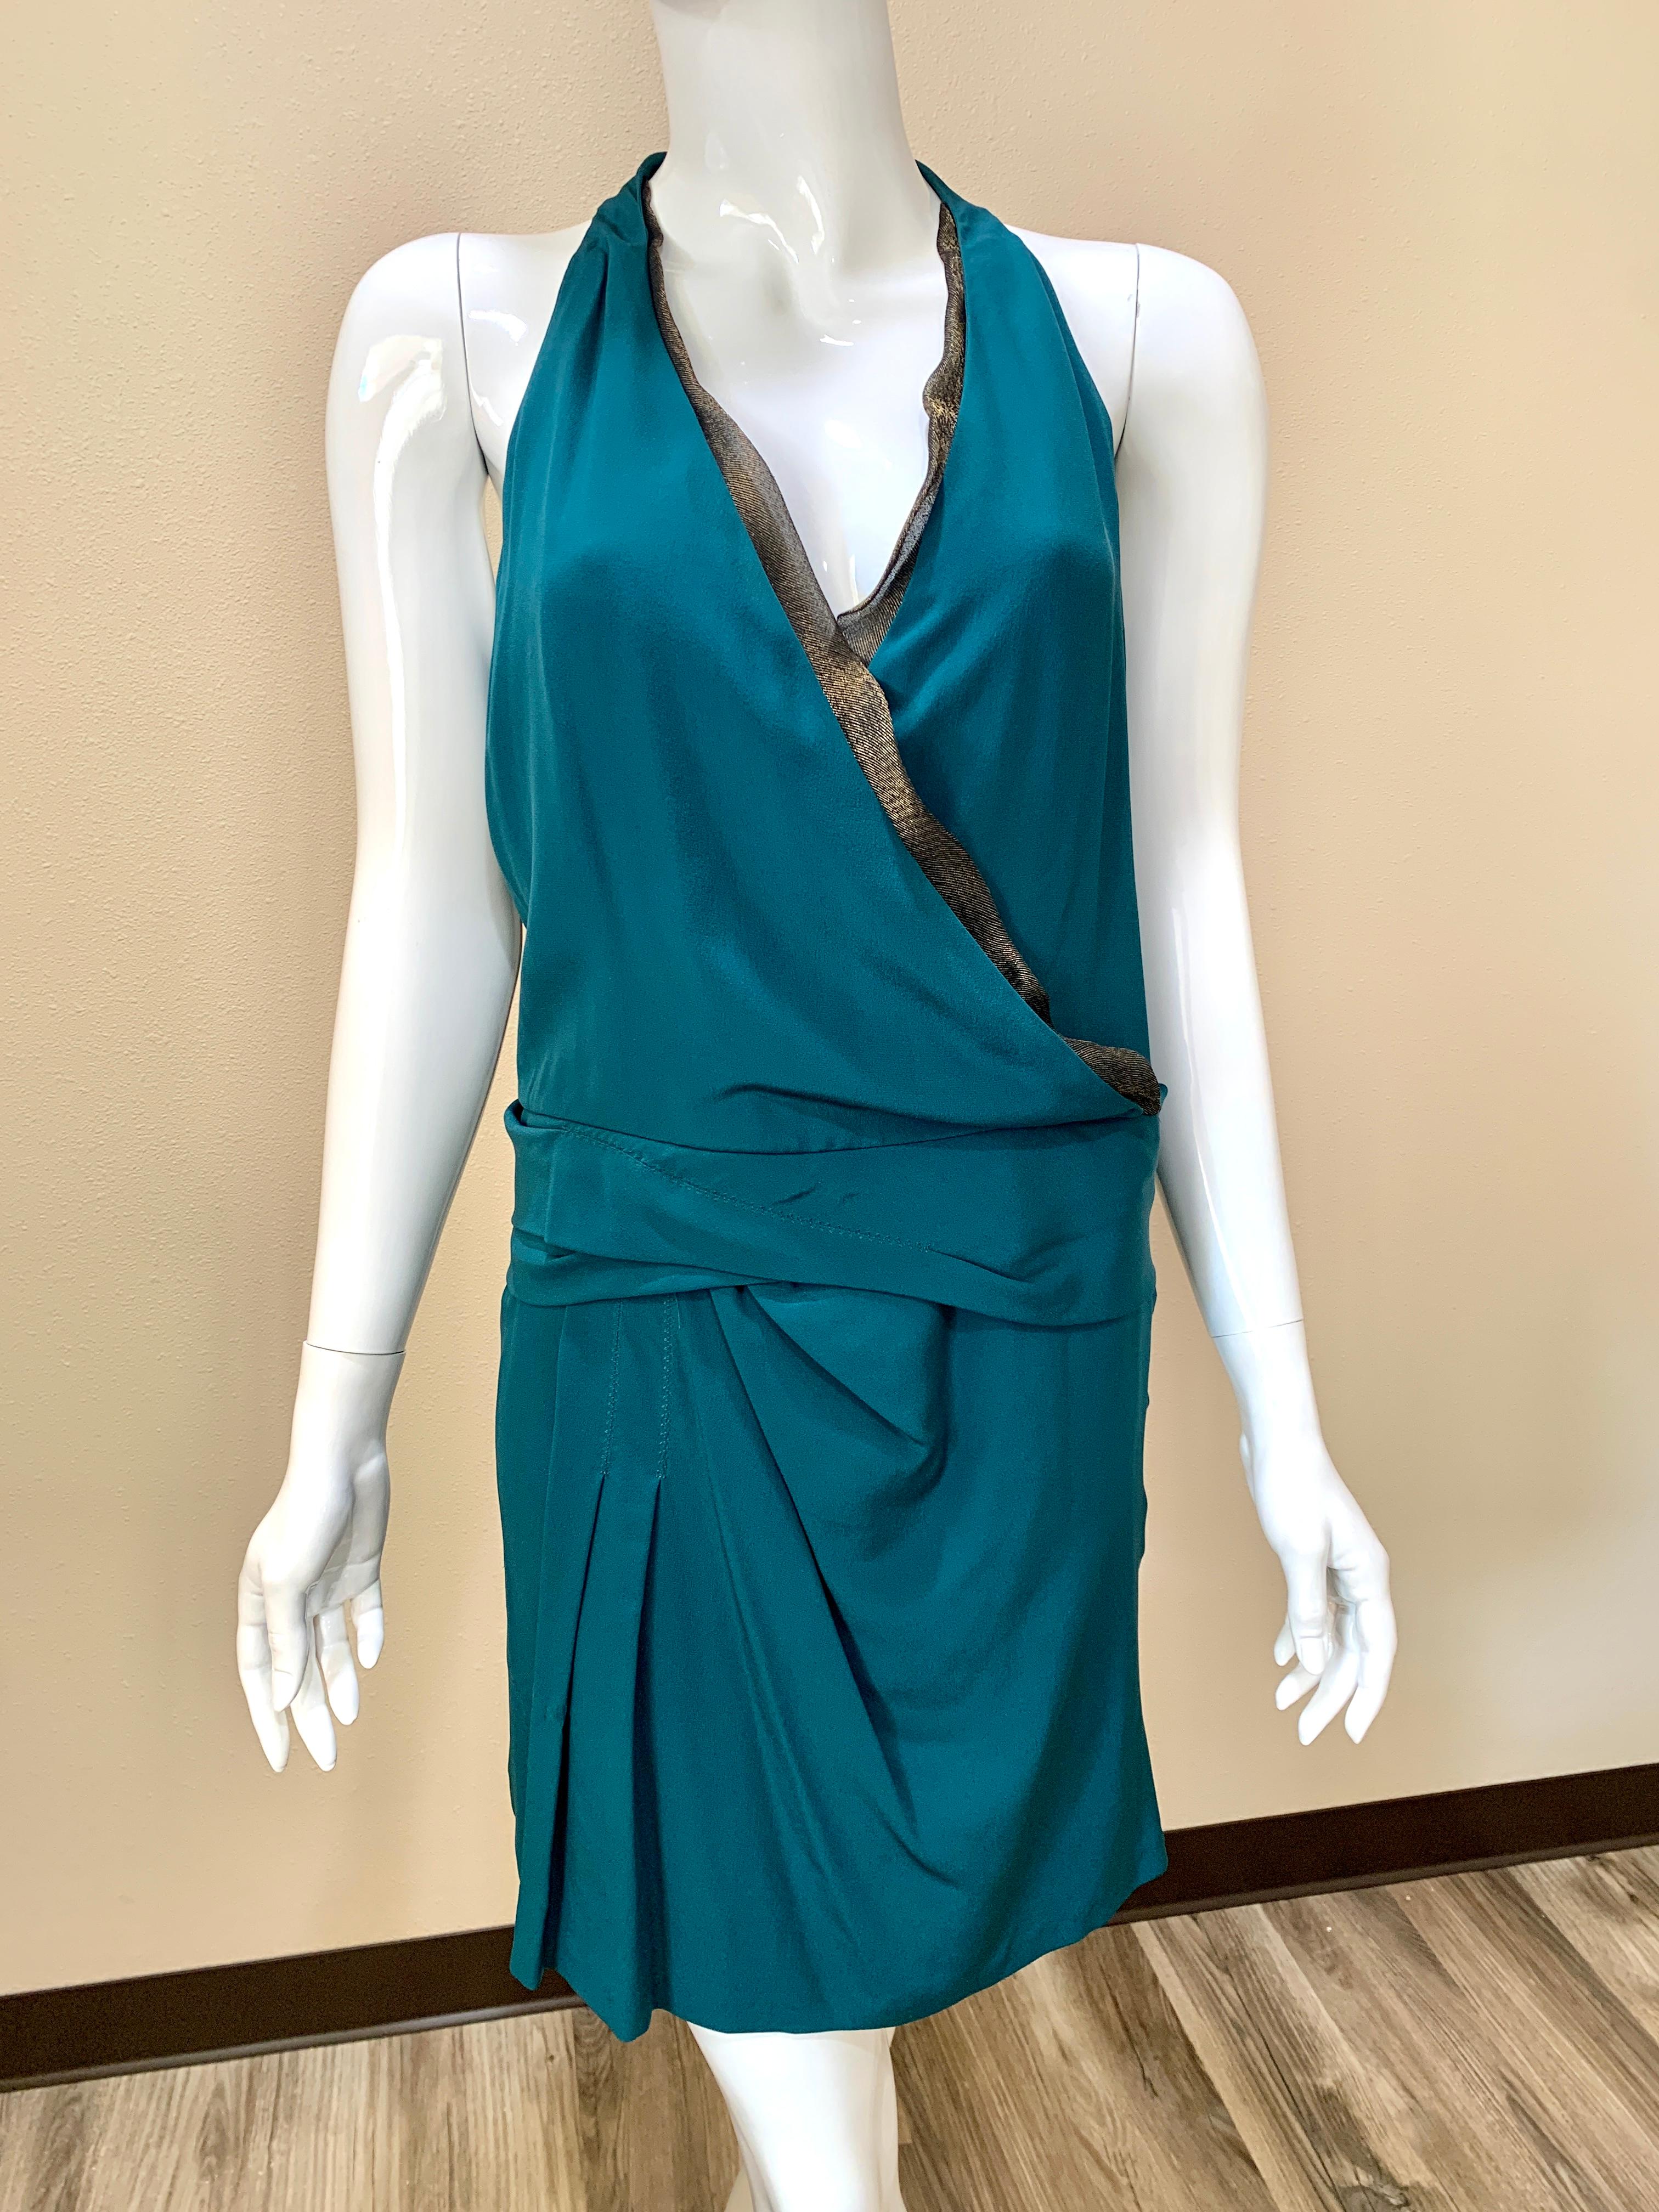 Gucci Teal Halter Cocktail Dress - with many different options to style it! 
Inner black gold inlay on the neck and detailed tassels with attached scarf. 
Scarf can hang in the back or the front or wrap around the neck (see attached photos). 
100%